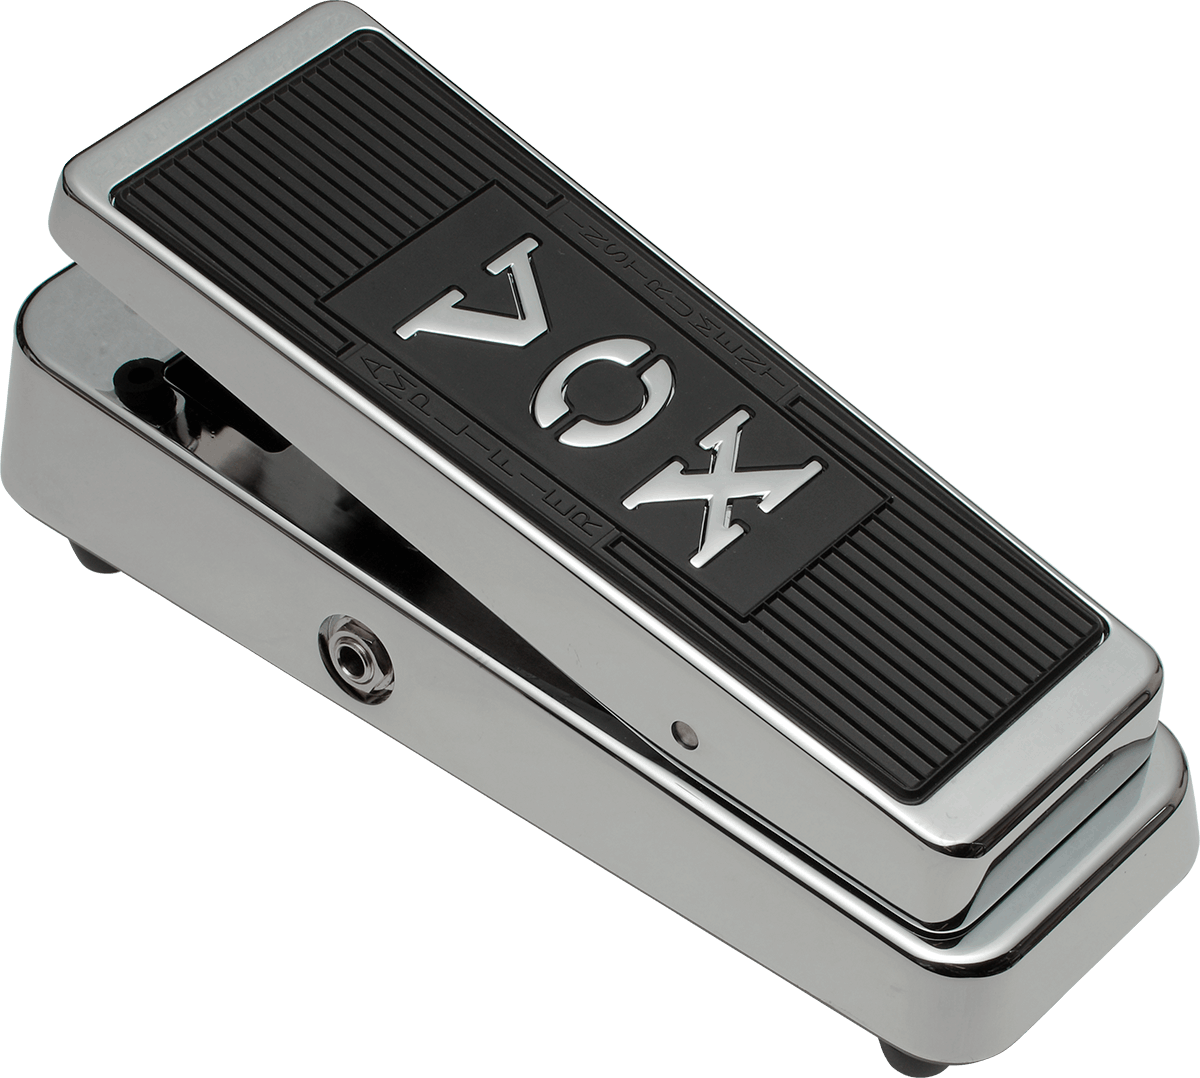 Vox Vrm-1-ltd Real Mccoy Chrome Edition Wah - Pedal wah / filtro - Main picture